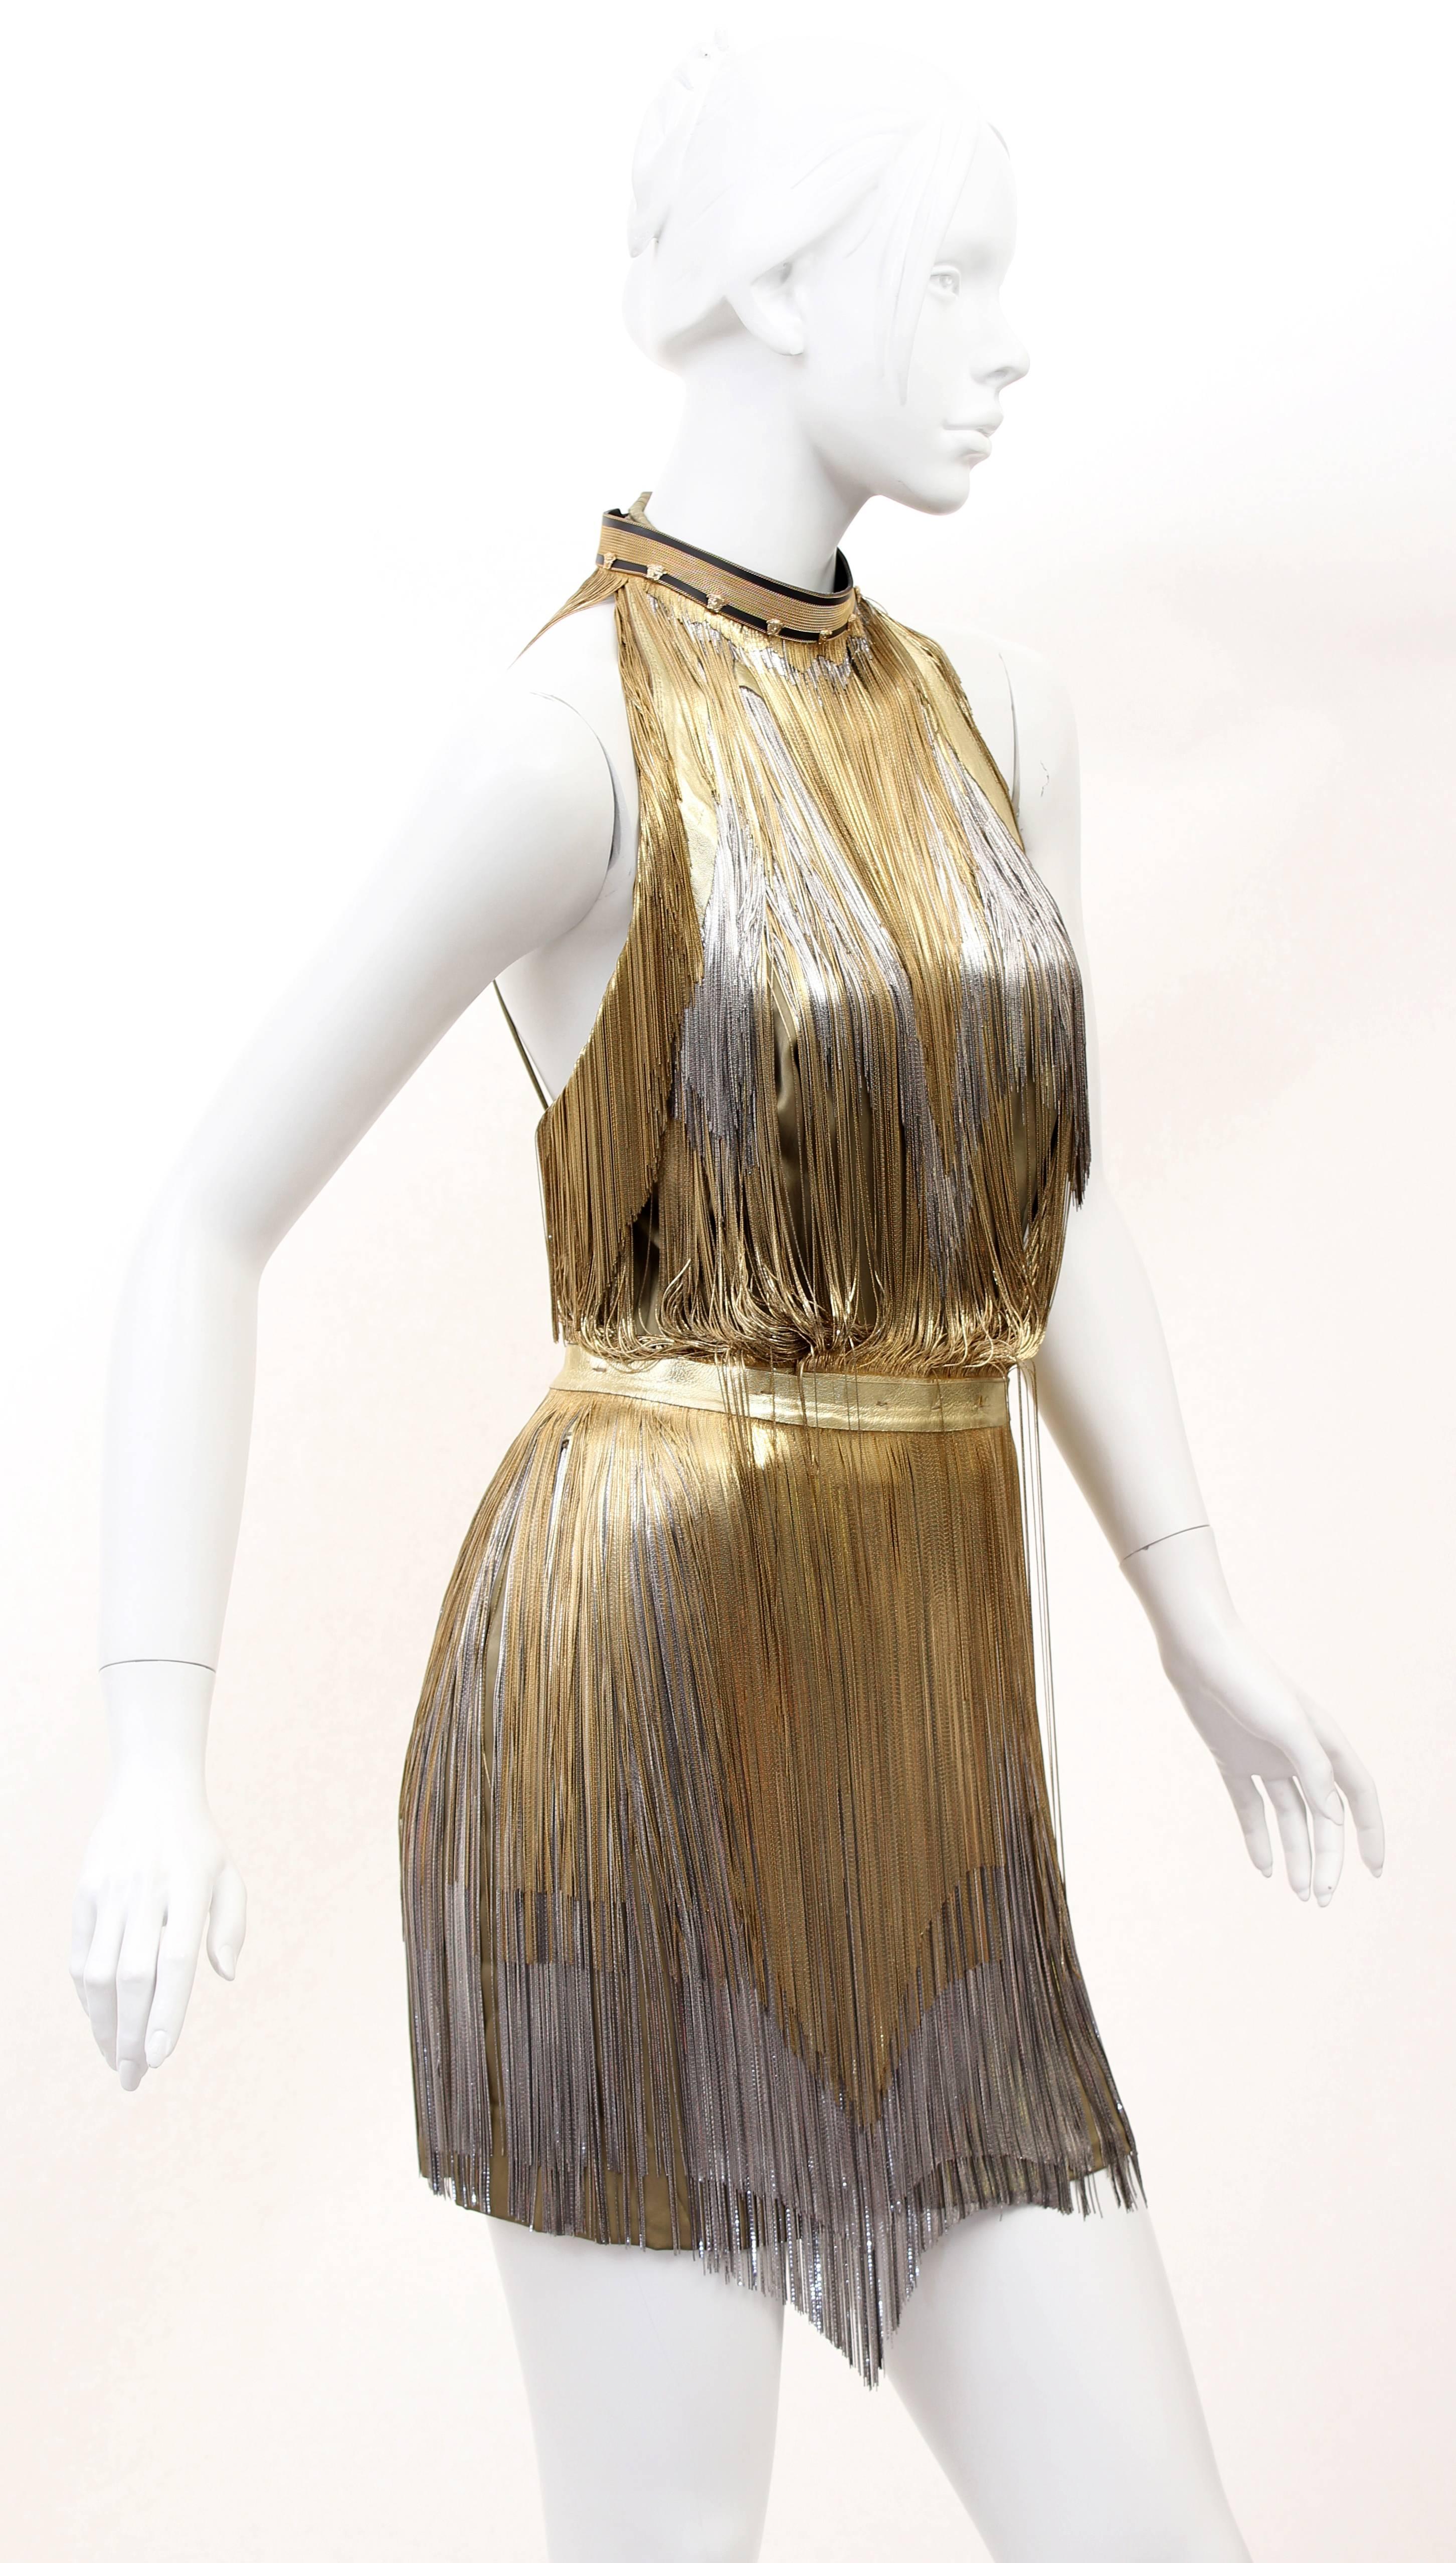 Versace Atelier

Gold Metal Fringe Tie Dyed Gabardine Dress

Tie dyed silk gabardine base with all over metal fringing. 

Halter neckline with leather strap and buckle closure at back. 

Detachable leather belt with buckle closure. 

Metal fringing